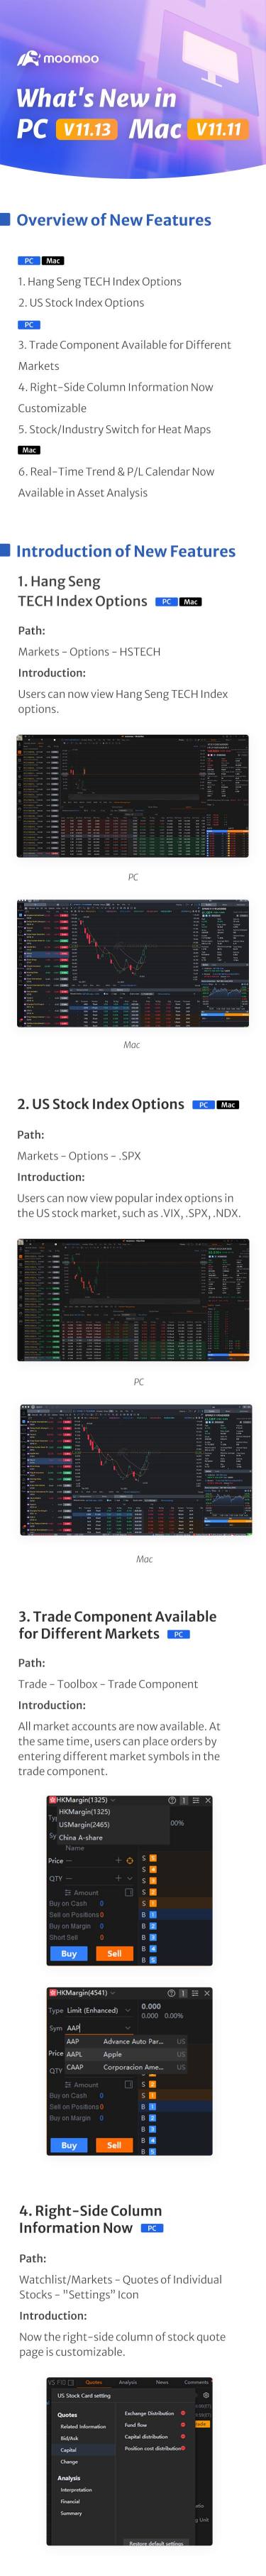 What’s New: US Stock Index Options Viewable Now in Both PC v11.13 & Mac v11.11